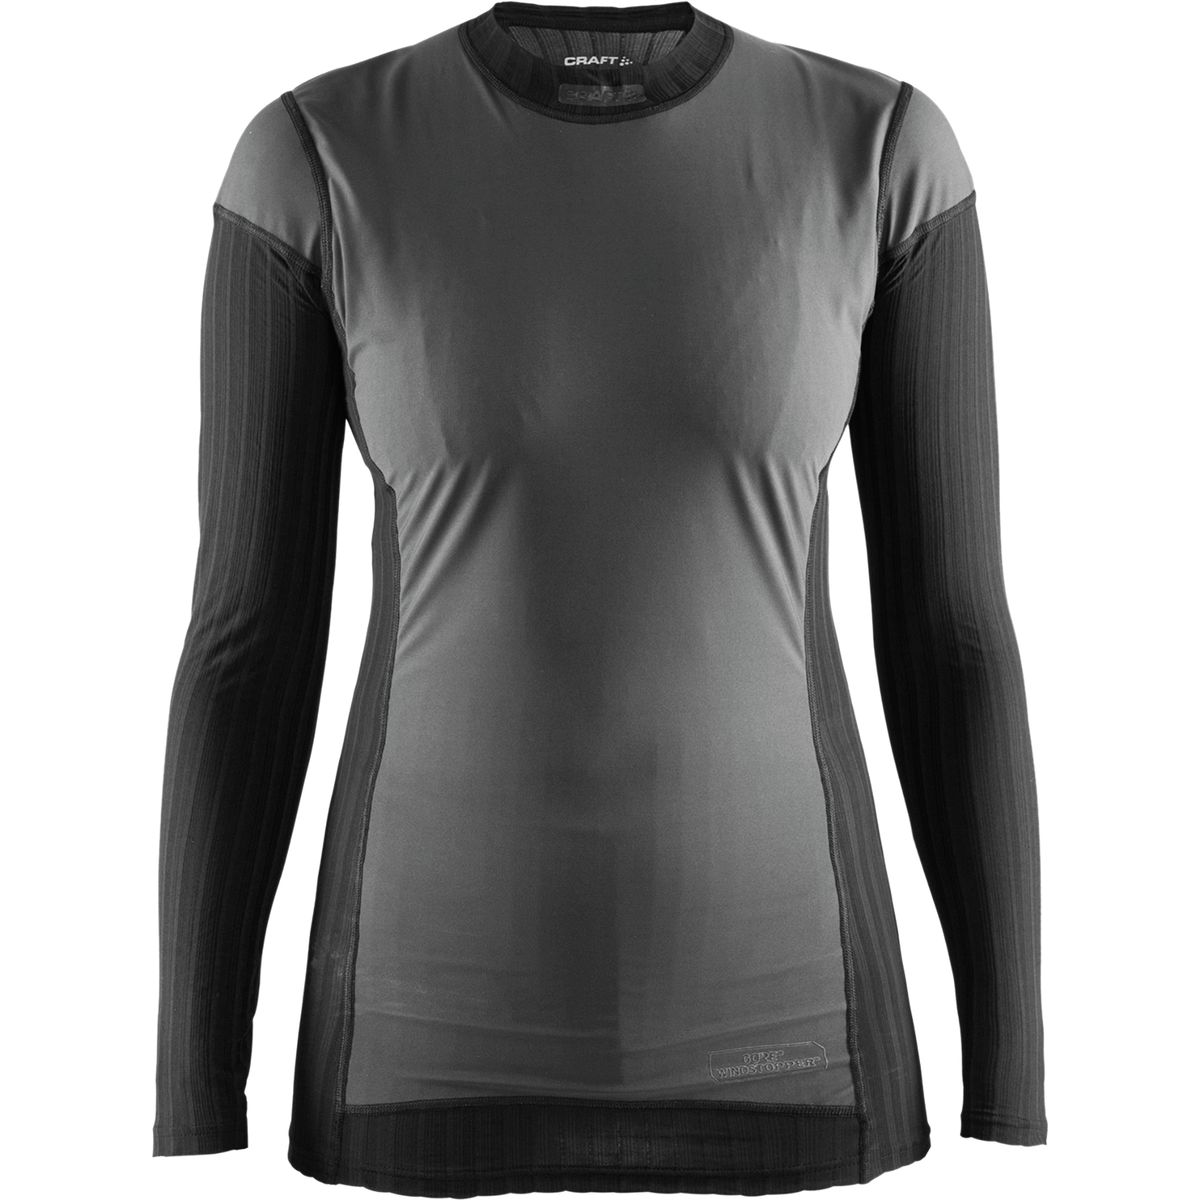 Craft Active Extreme 2.0 Windstopper Crewneck Base Layer Women's